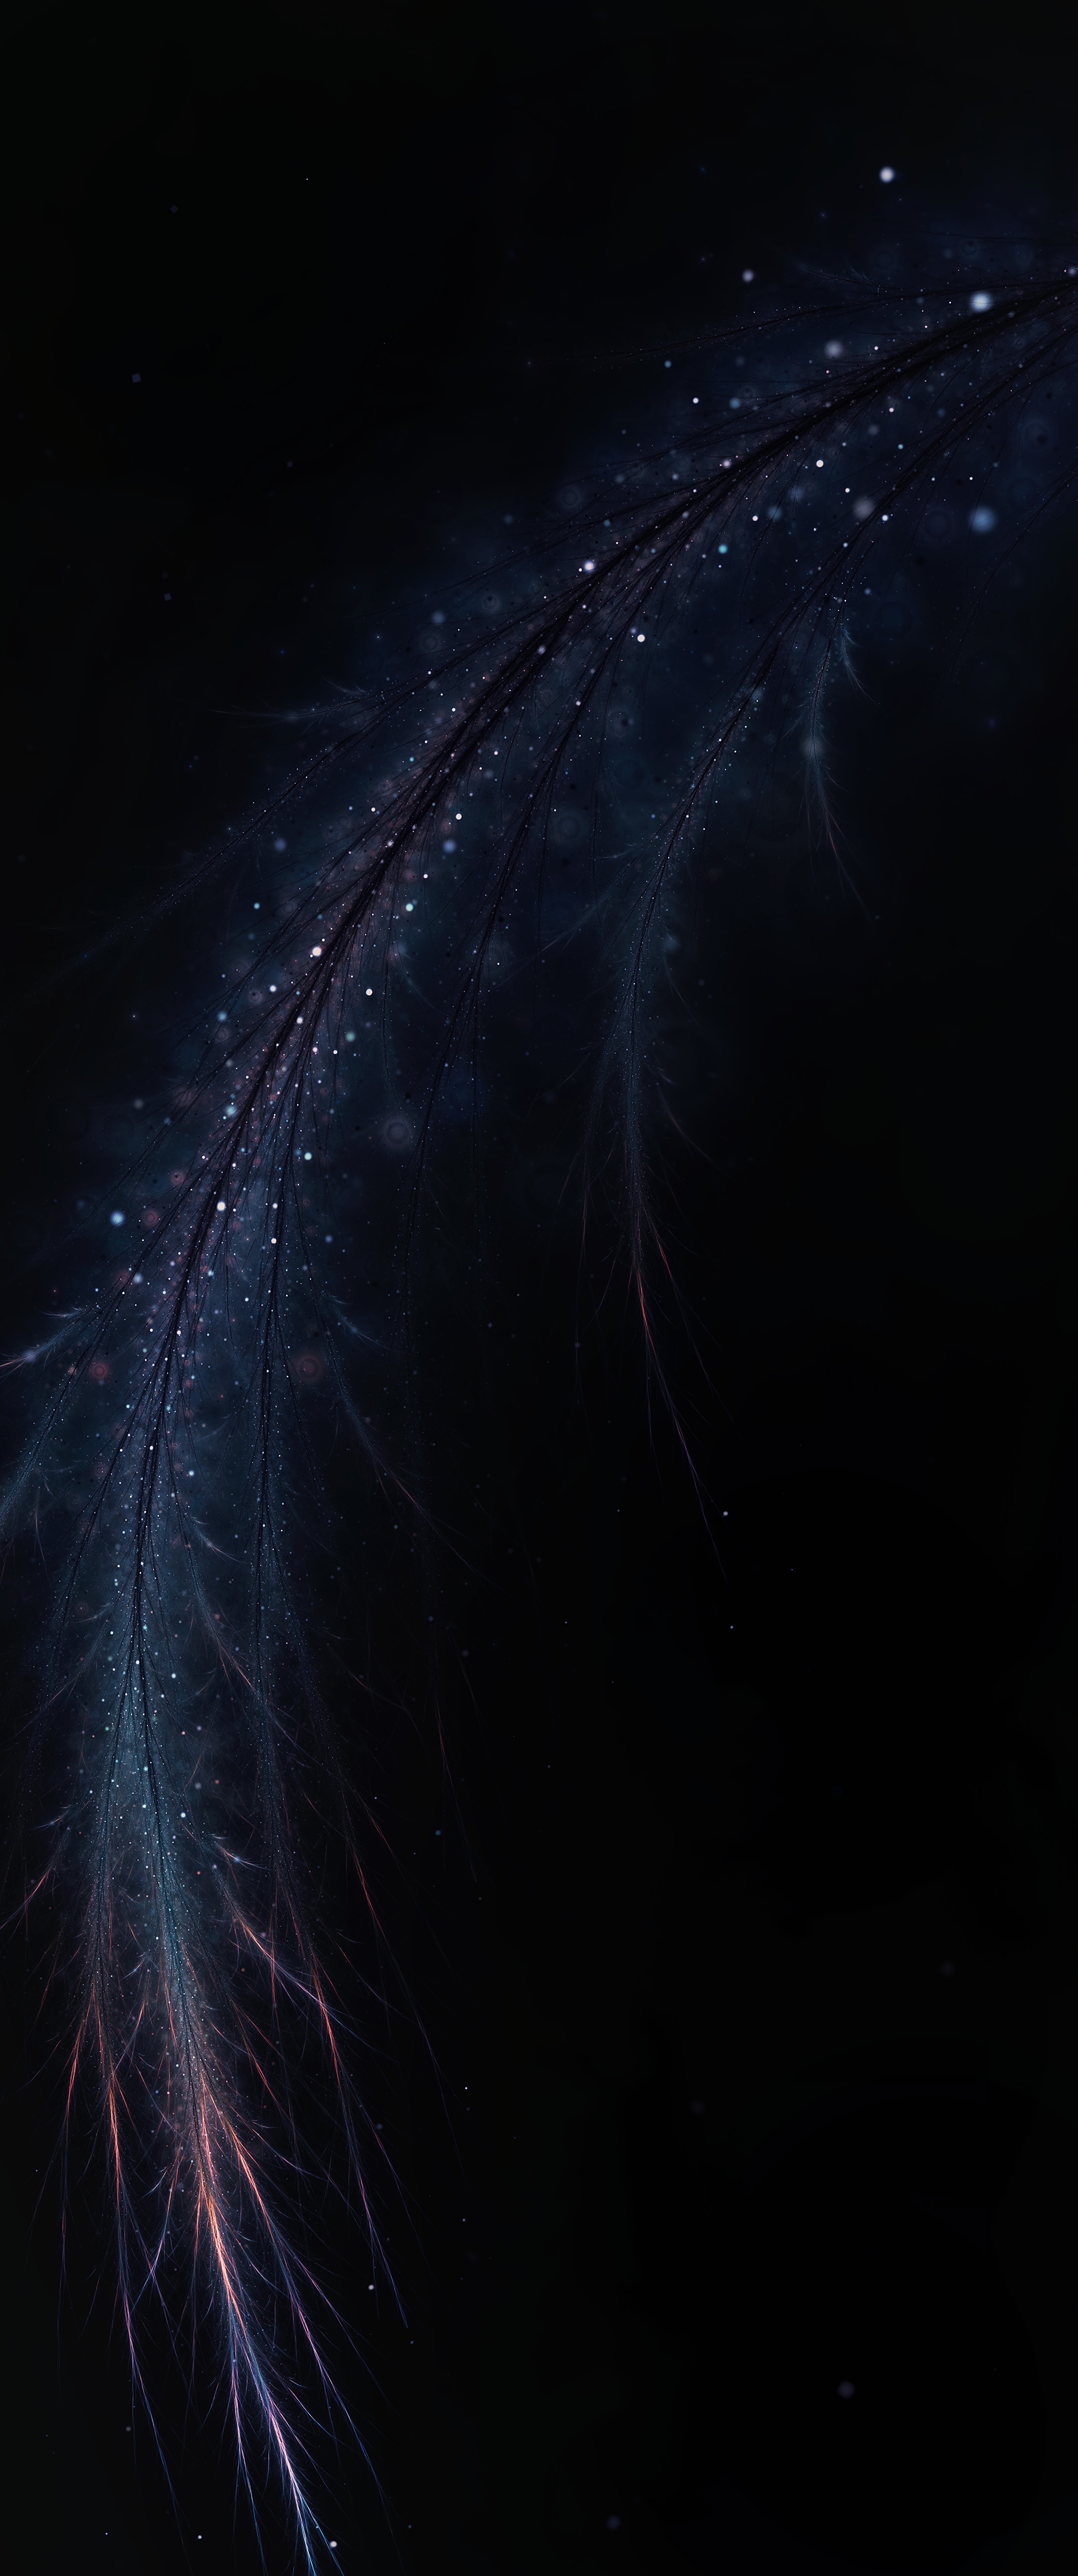 dark, abstract, feather, fractal, shine, brilliance, branch, pen images